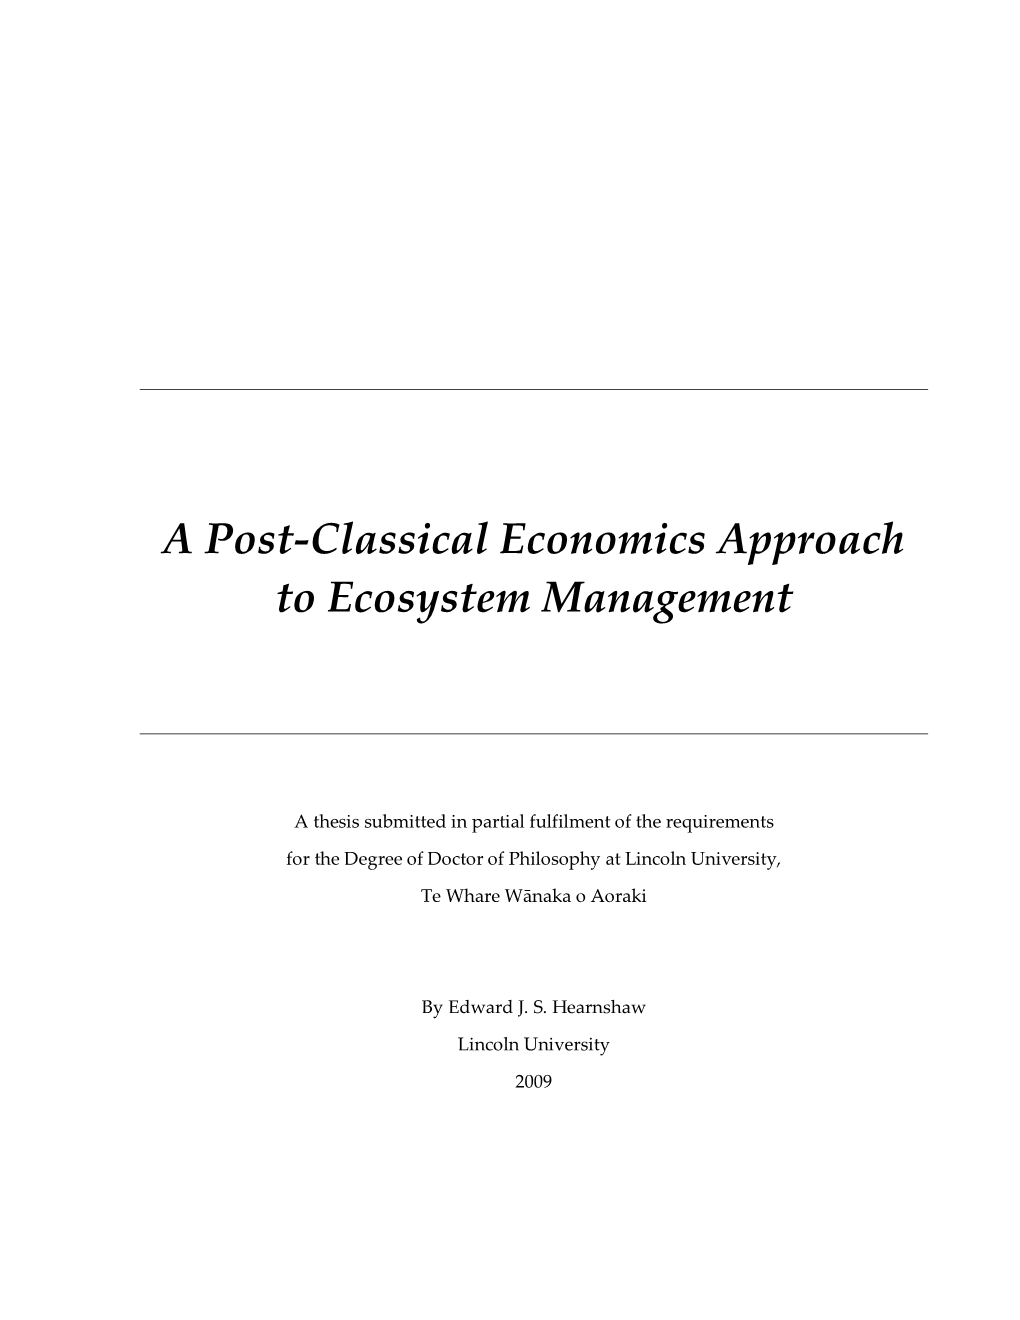 Post-Classical Economics Approach to Ecosystem Management